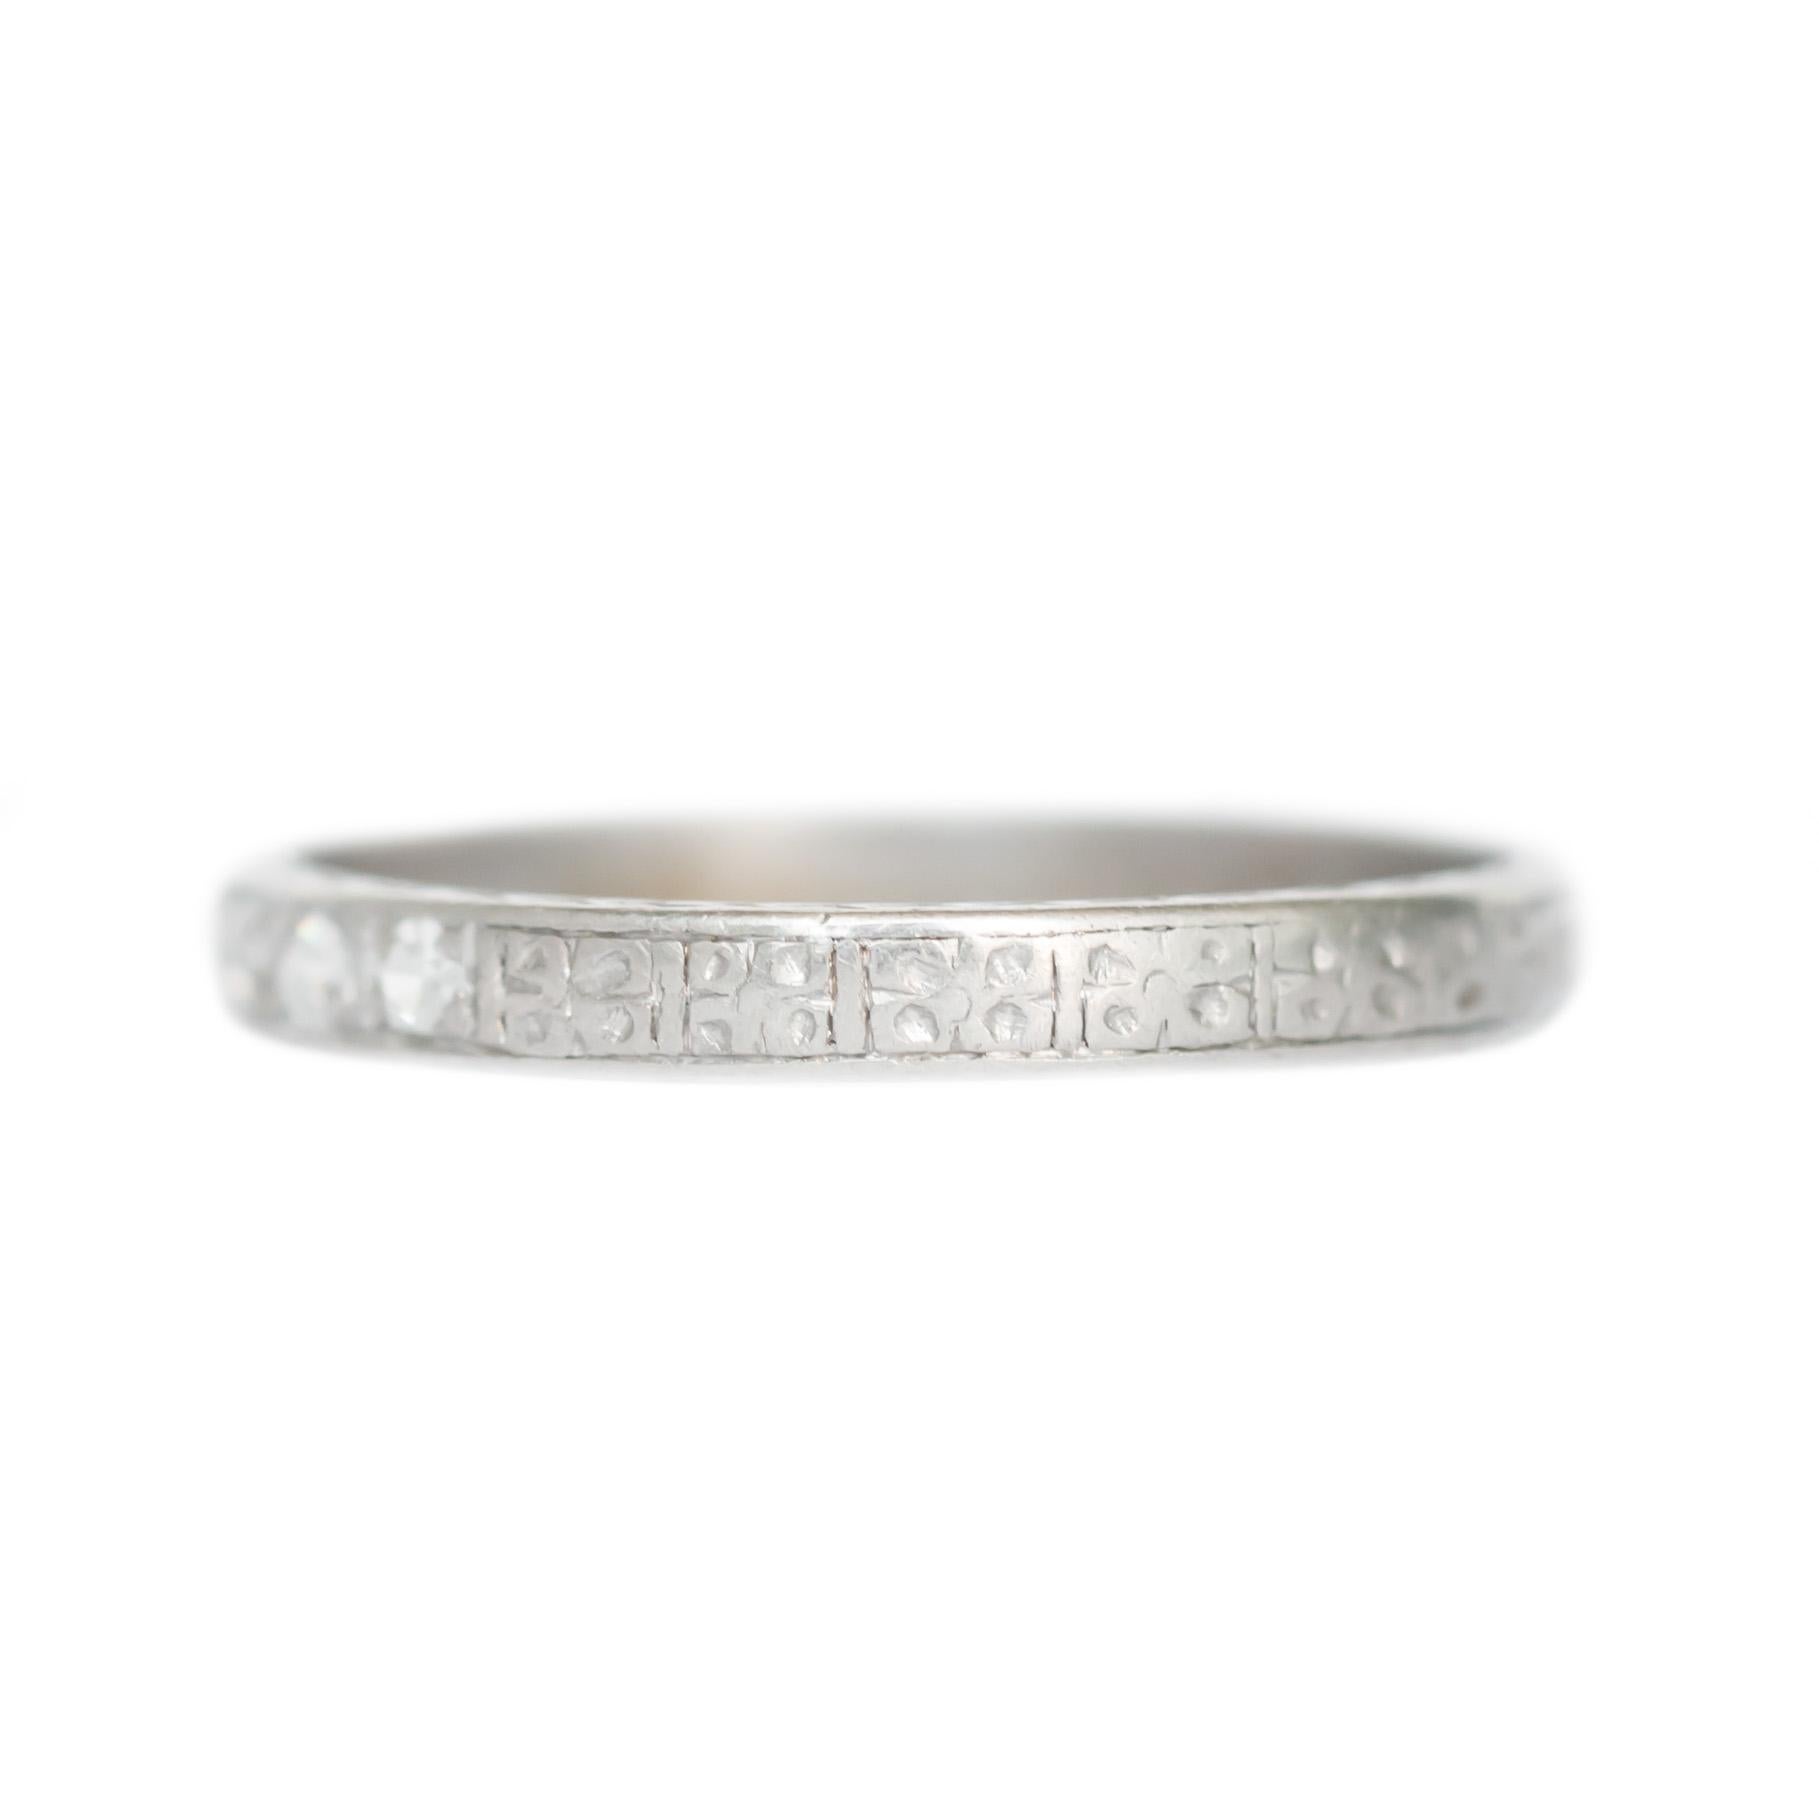 Item Details: 
Ring Size: 7.75
Metal Type: Platinum
Weight: 2.8 grams

Side Stone Details: 
Shape: Old European Brilliant
Total Carat Weight: .12 carat, total weight
Color: F
Clarity: VS

Width of band: 2.51mm
Finger to Top of Stone Measurement: